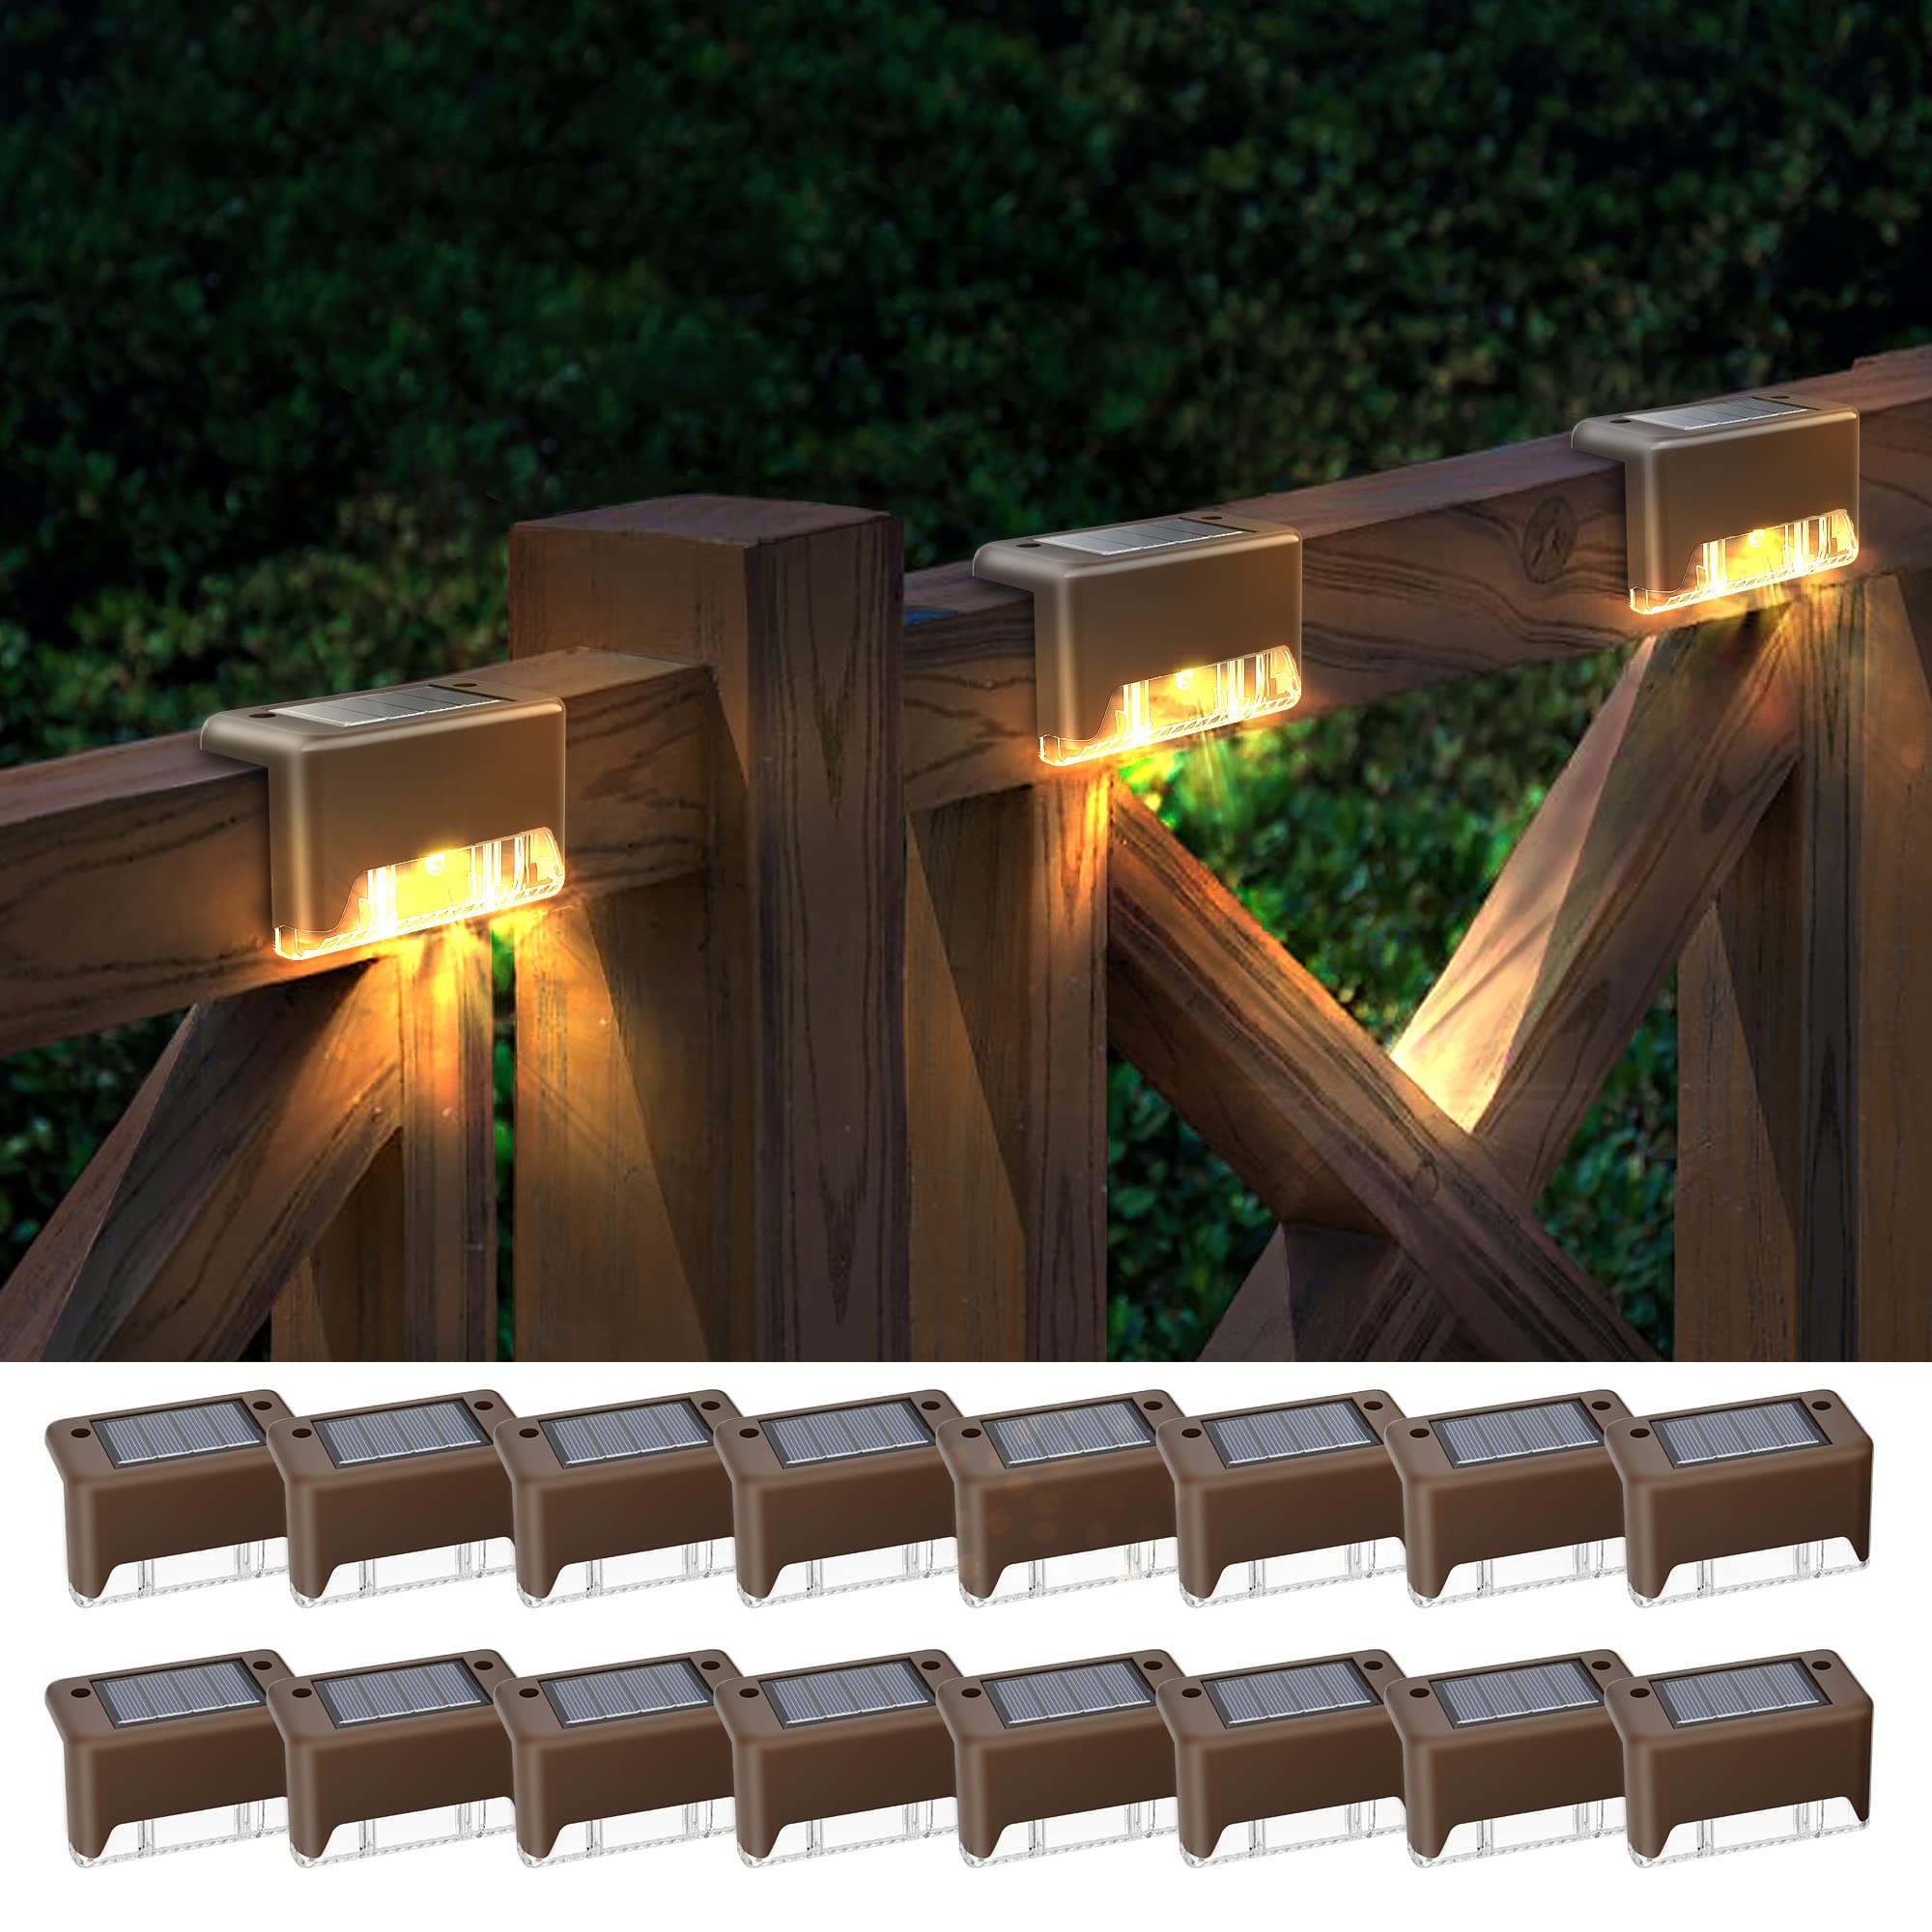 Otdair Solar Deck Lights, 16 Solar Step Lights Waterproof LED Solar Stair Lights, Outdoor Solar Fence Lights for Deck, Stairs, S